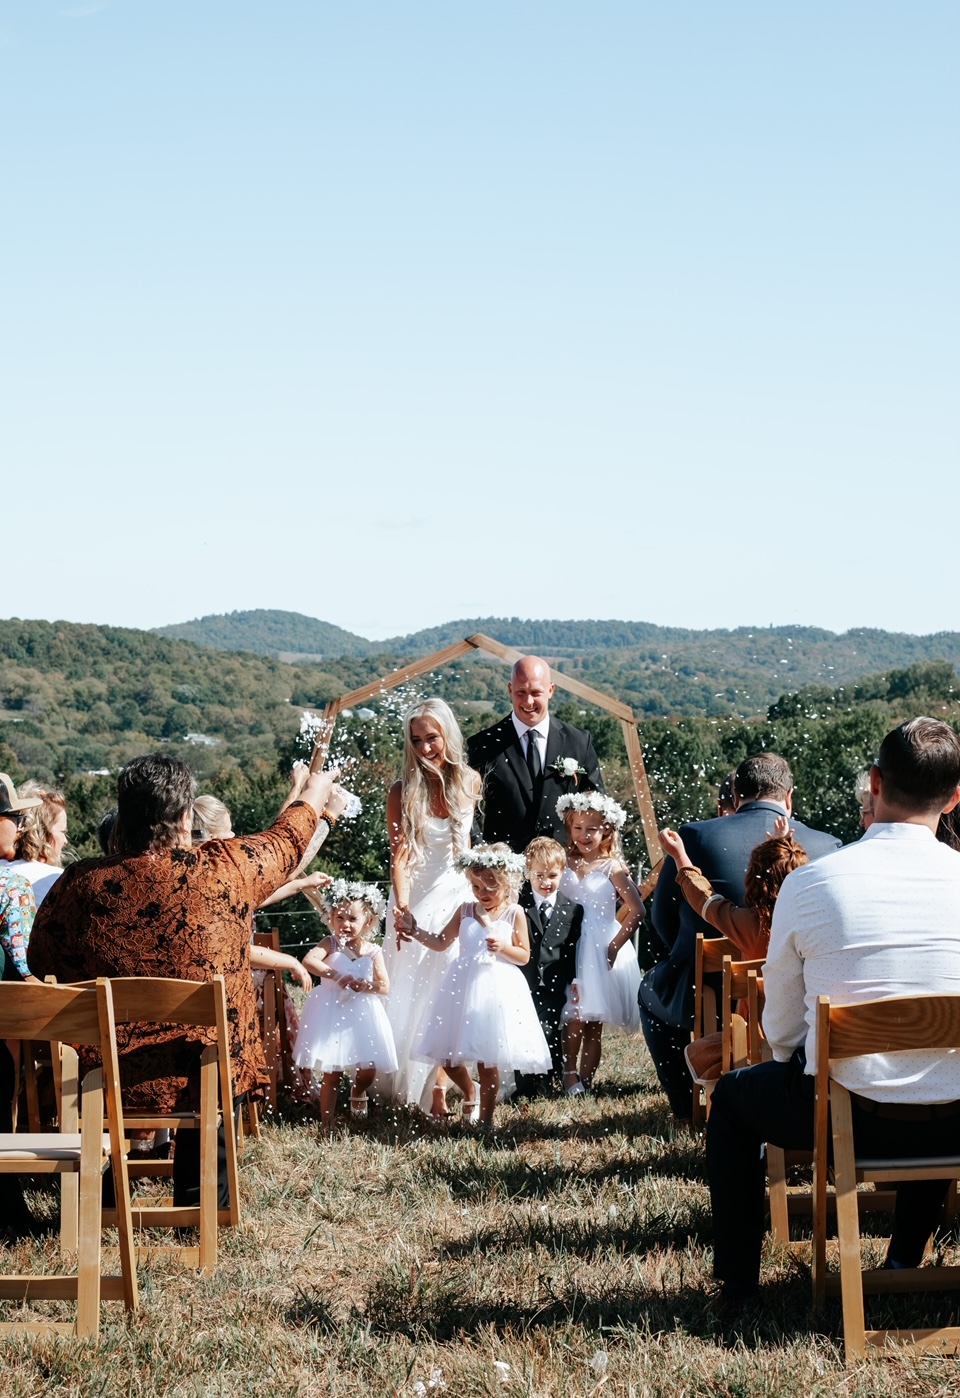 Family Focused Wedding with Kids Tots Aloud Nashville